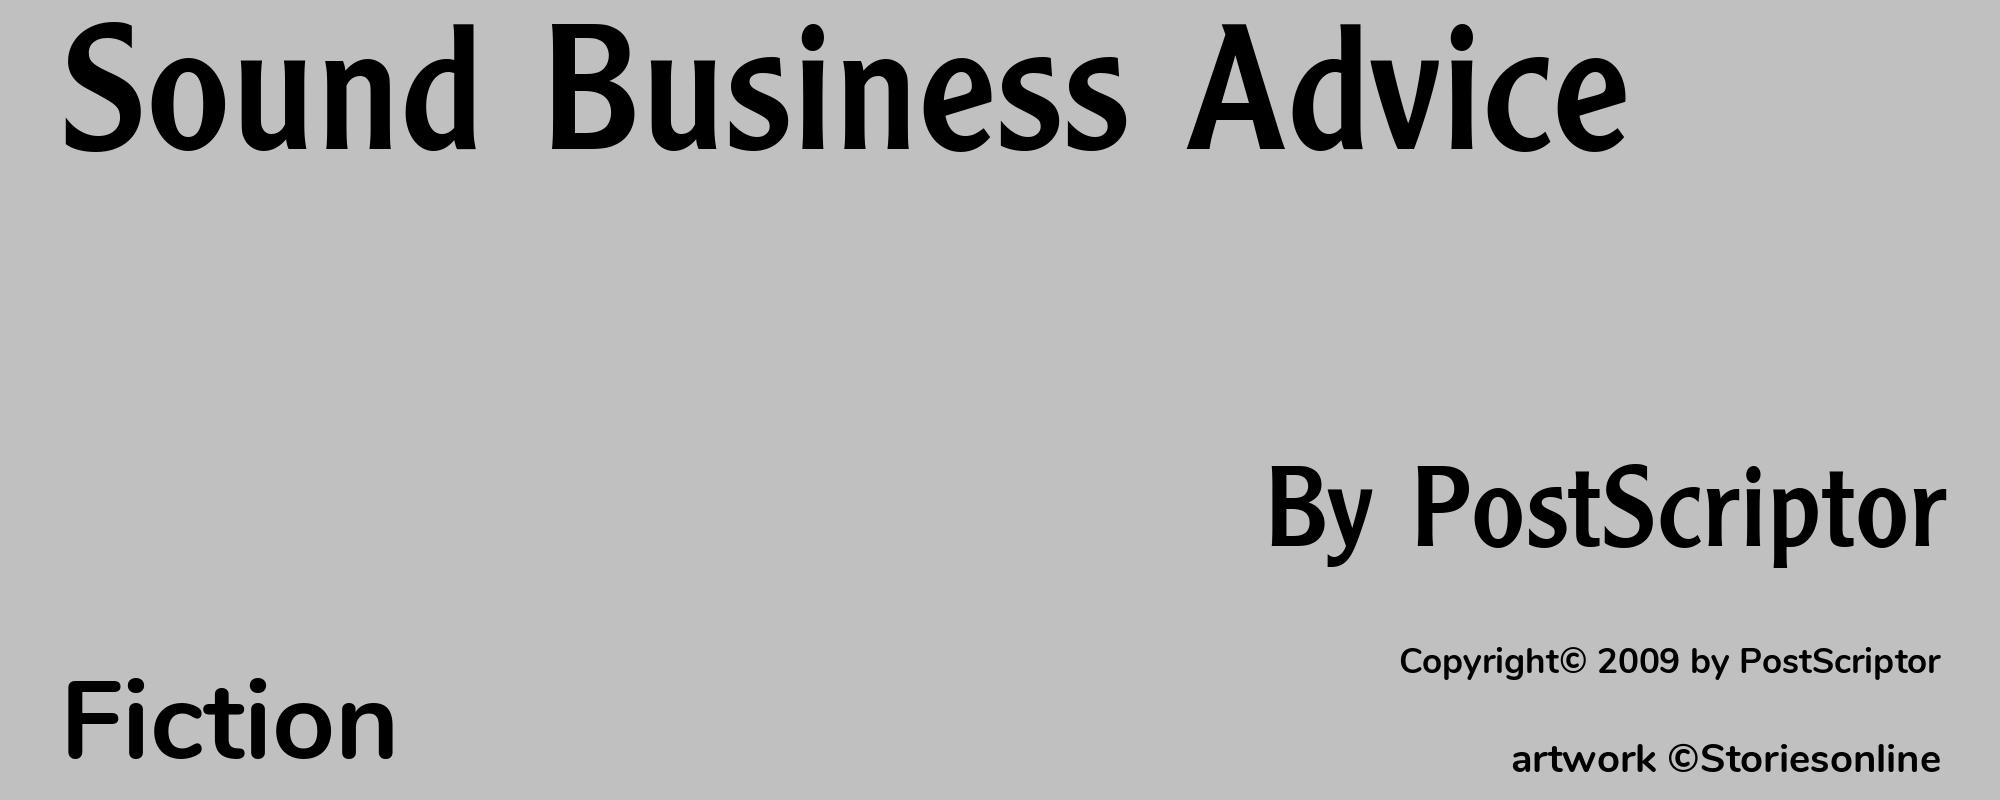 Sound Business Advice - Cover